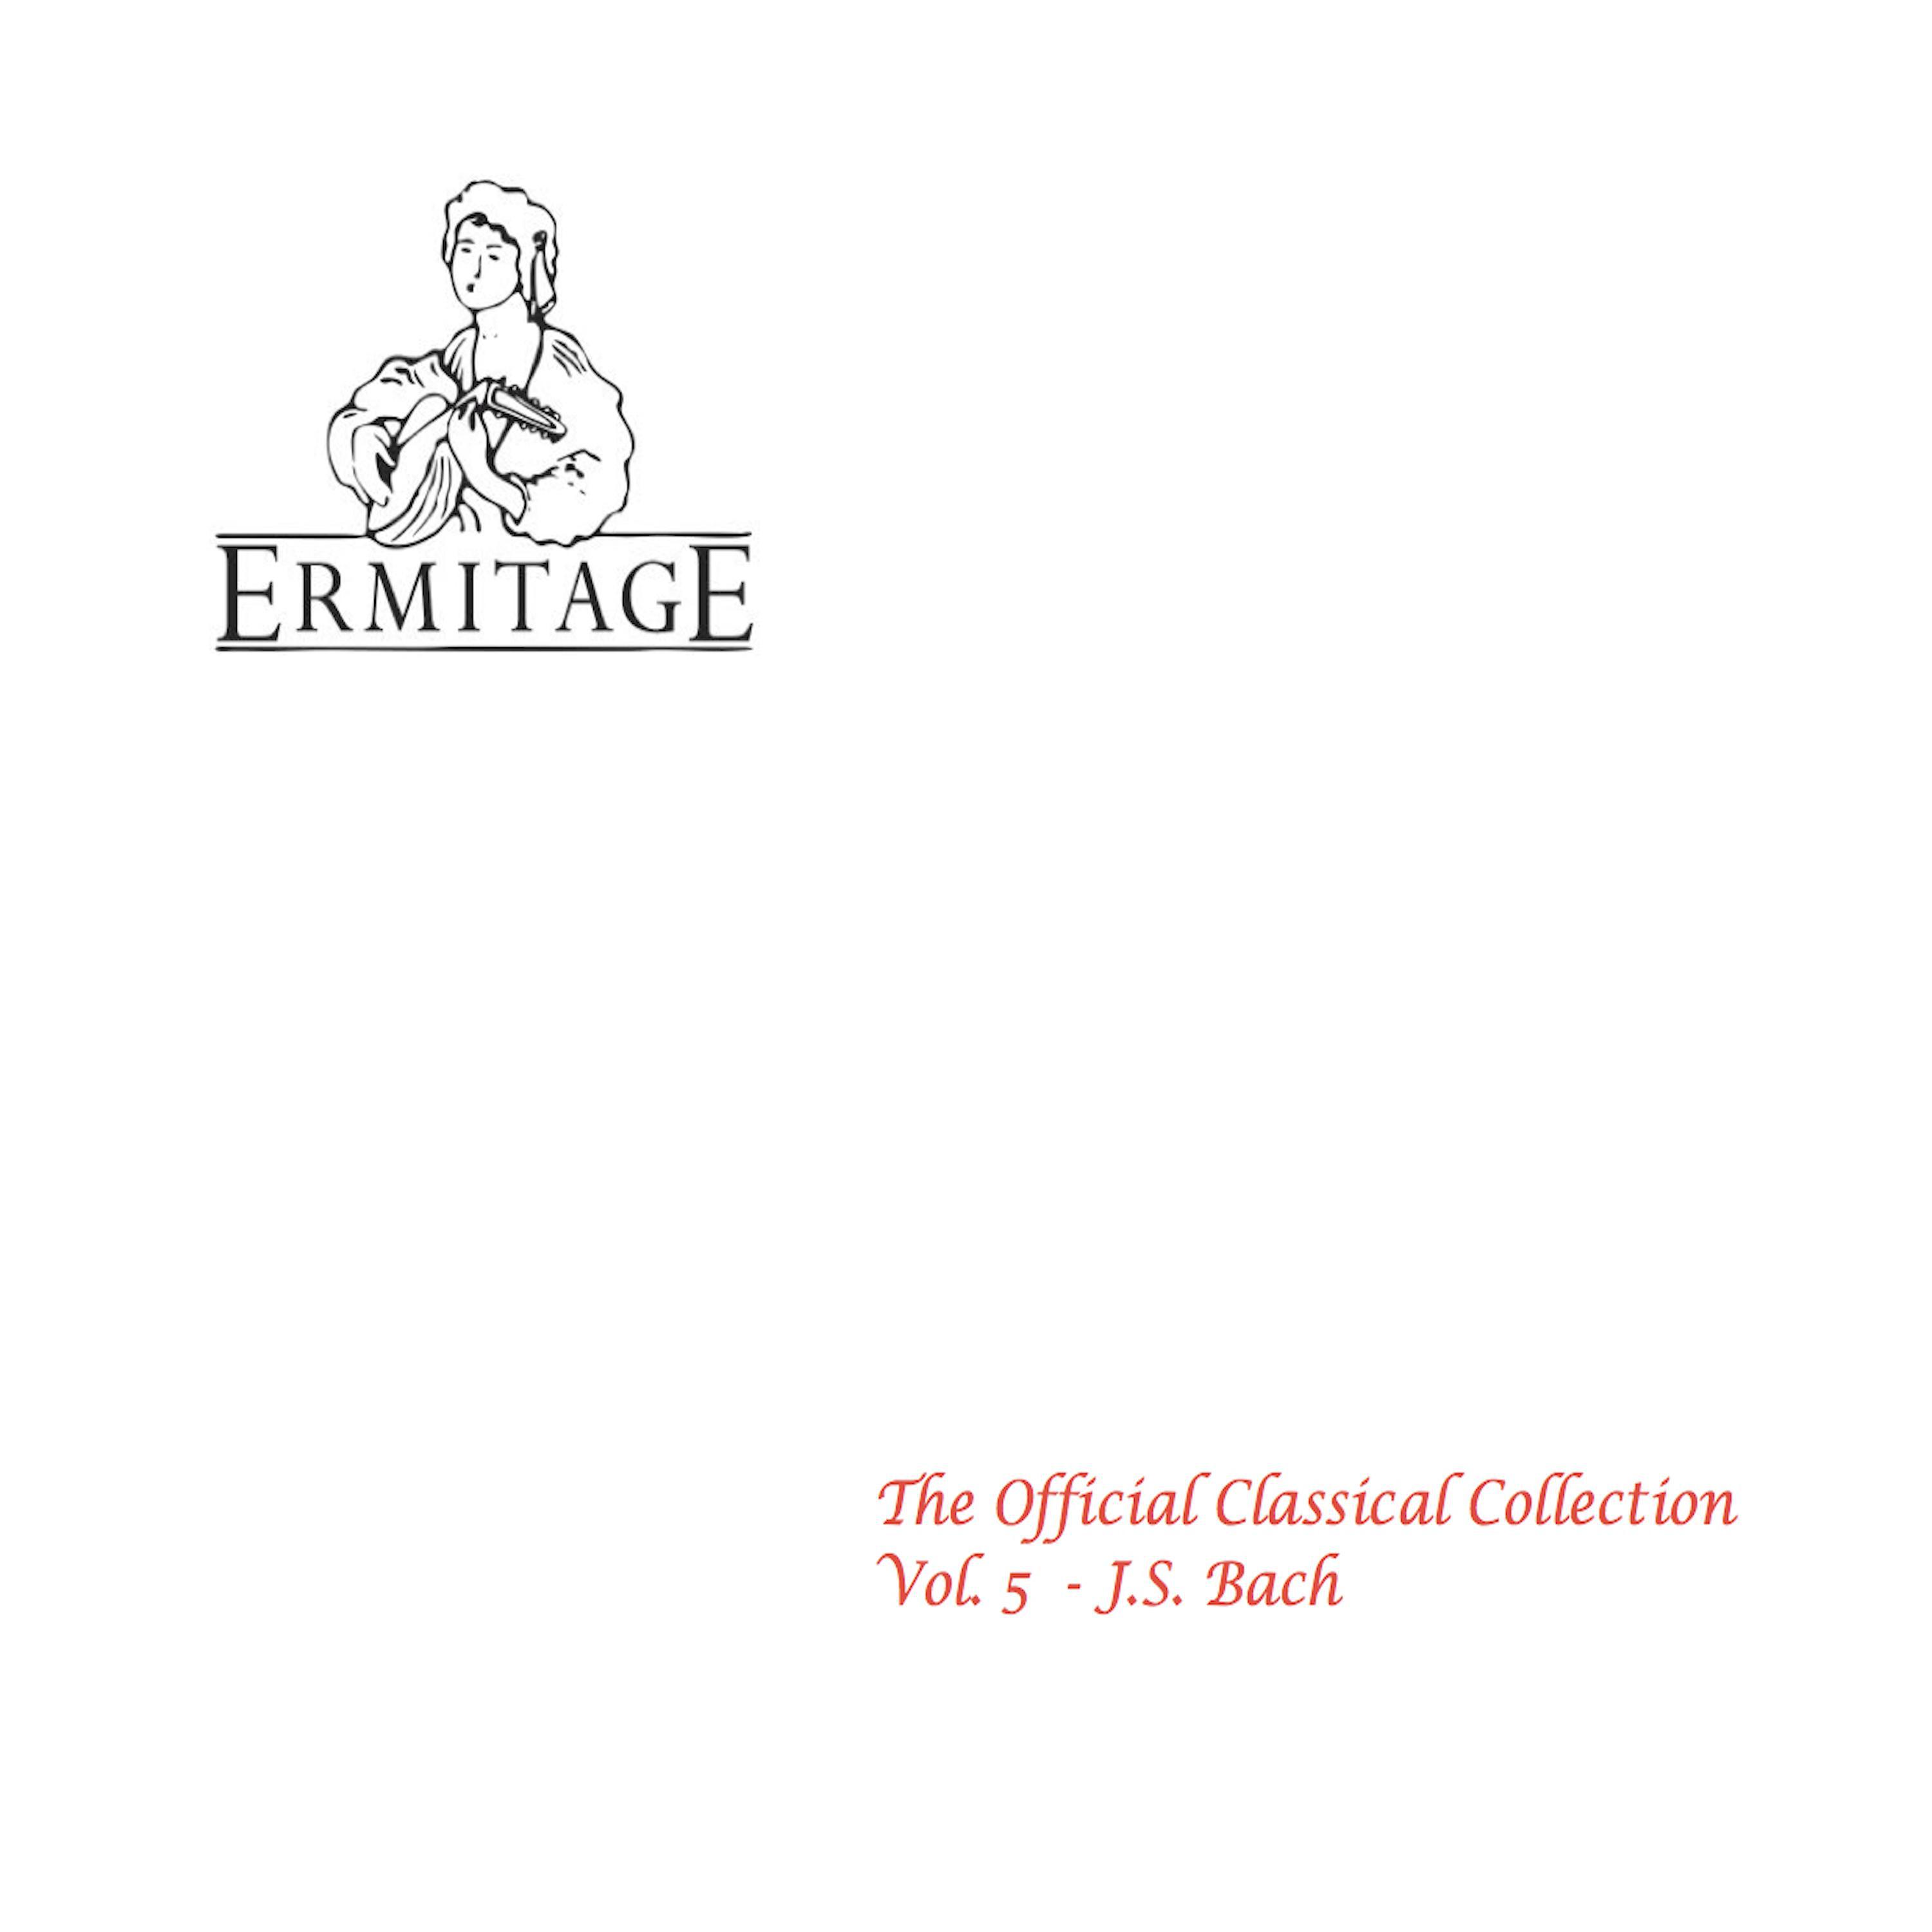 The Official Classical Collection, Vol. 5 J.S. Bach